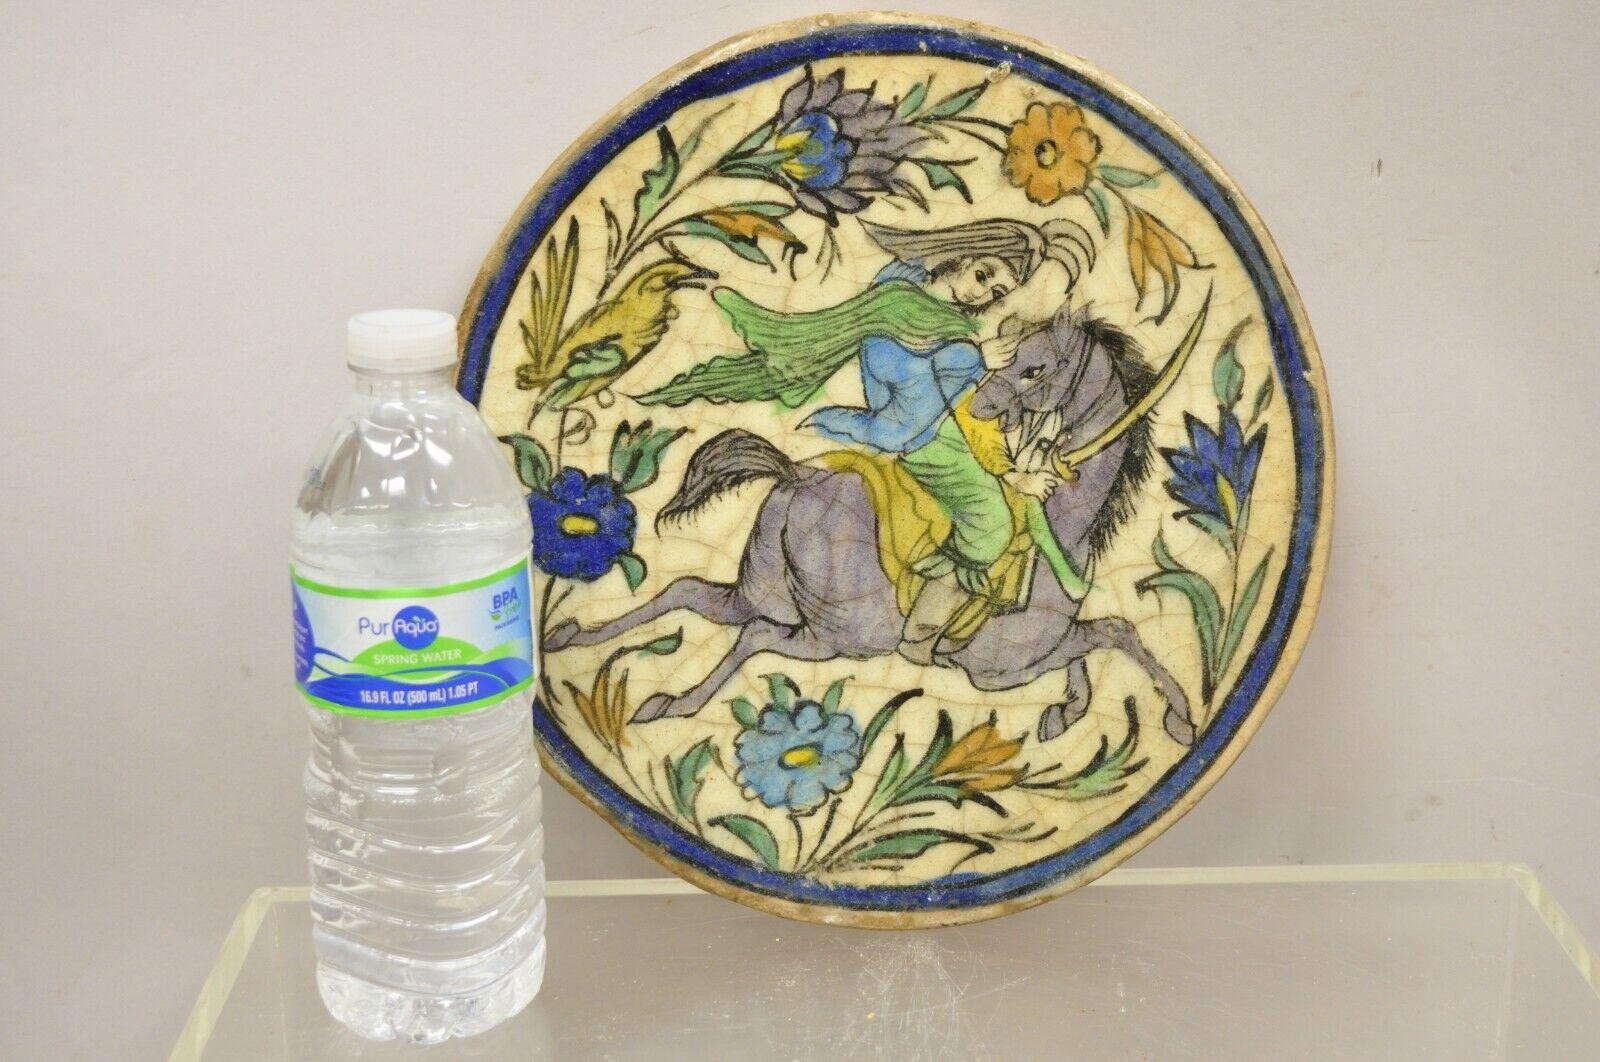 Antique Persian Iznik Qajar style ceramic pottery round tile purple horse and rider C4. Item features an original crackle glazed finish, heavy ceramic pottery construction, very impressive detail, wonderful style and form. Great to mount as wall art